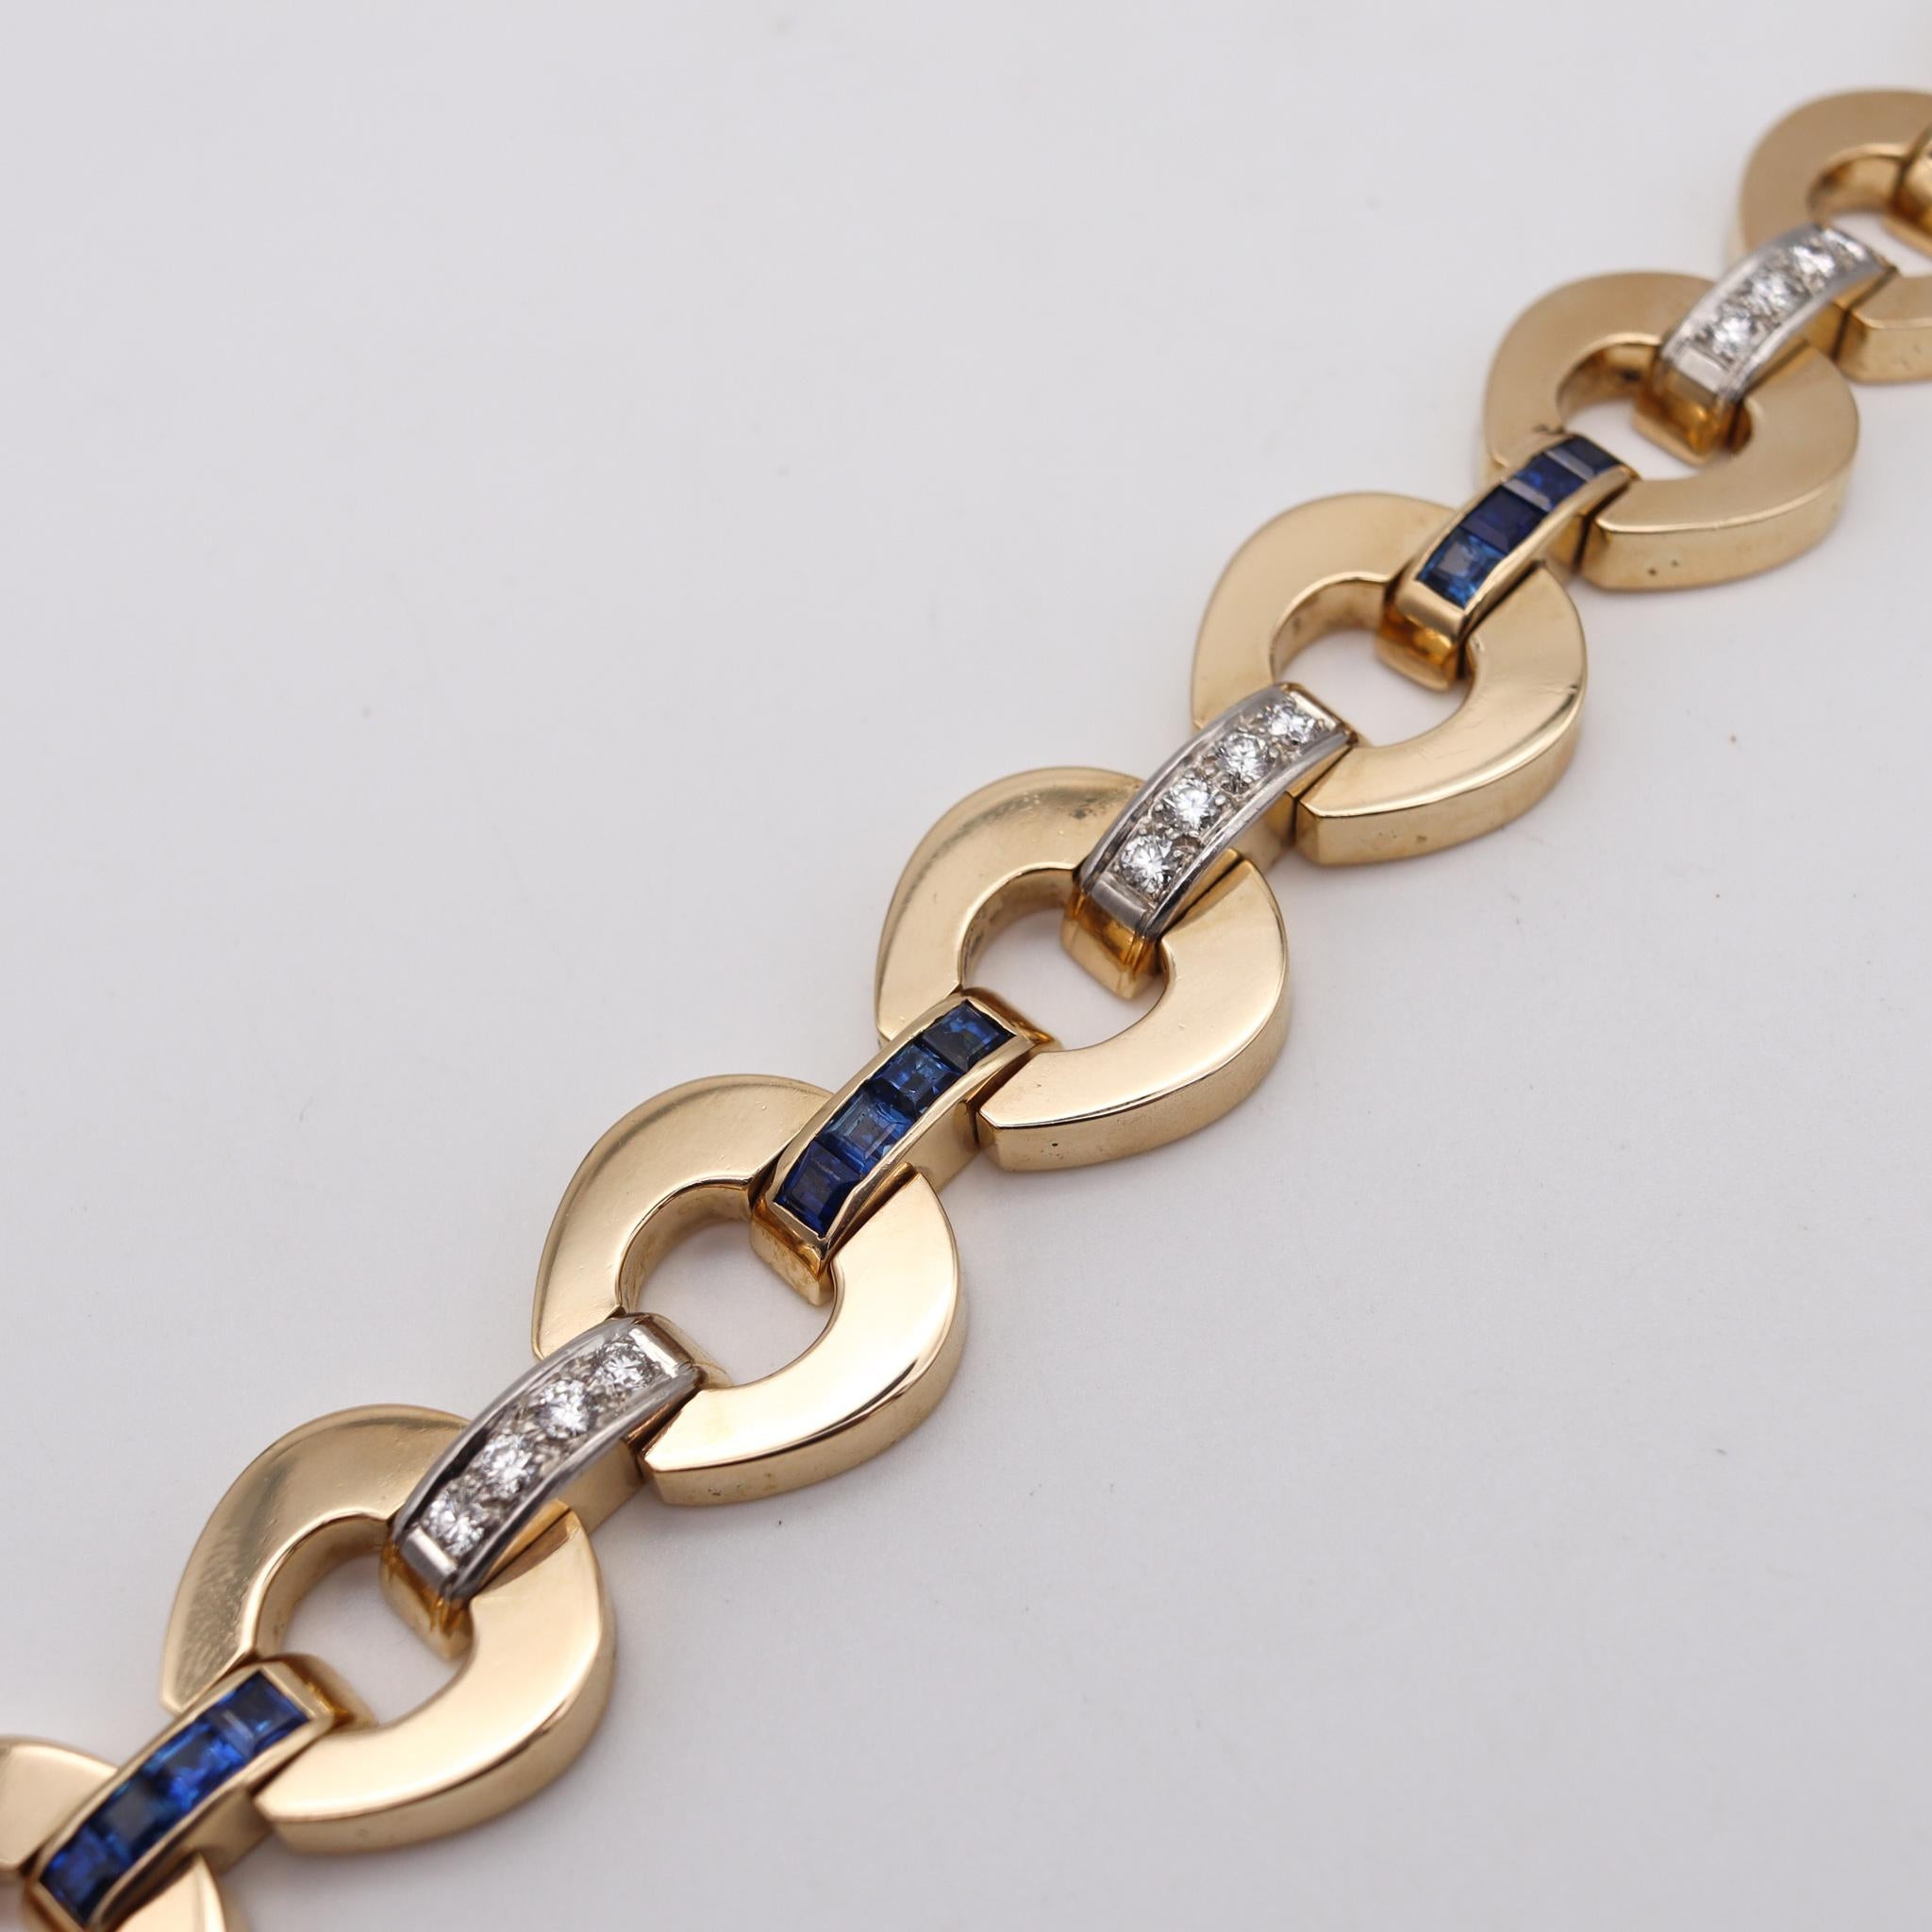 Retro Modernist Bracelet in 14Kt Yellow Gold with 6.56 Ctw Diamonds & Sapphires In Excellent Condition For Sale In Miami, FL